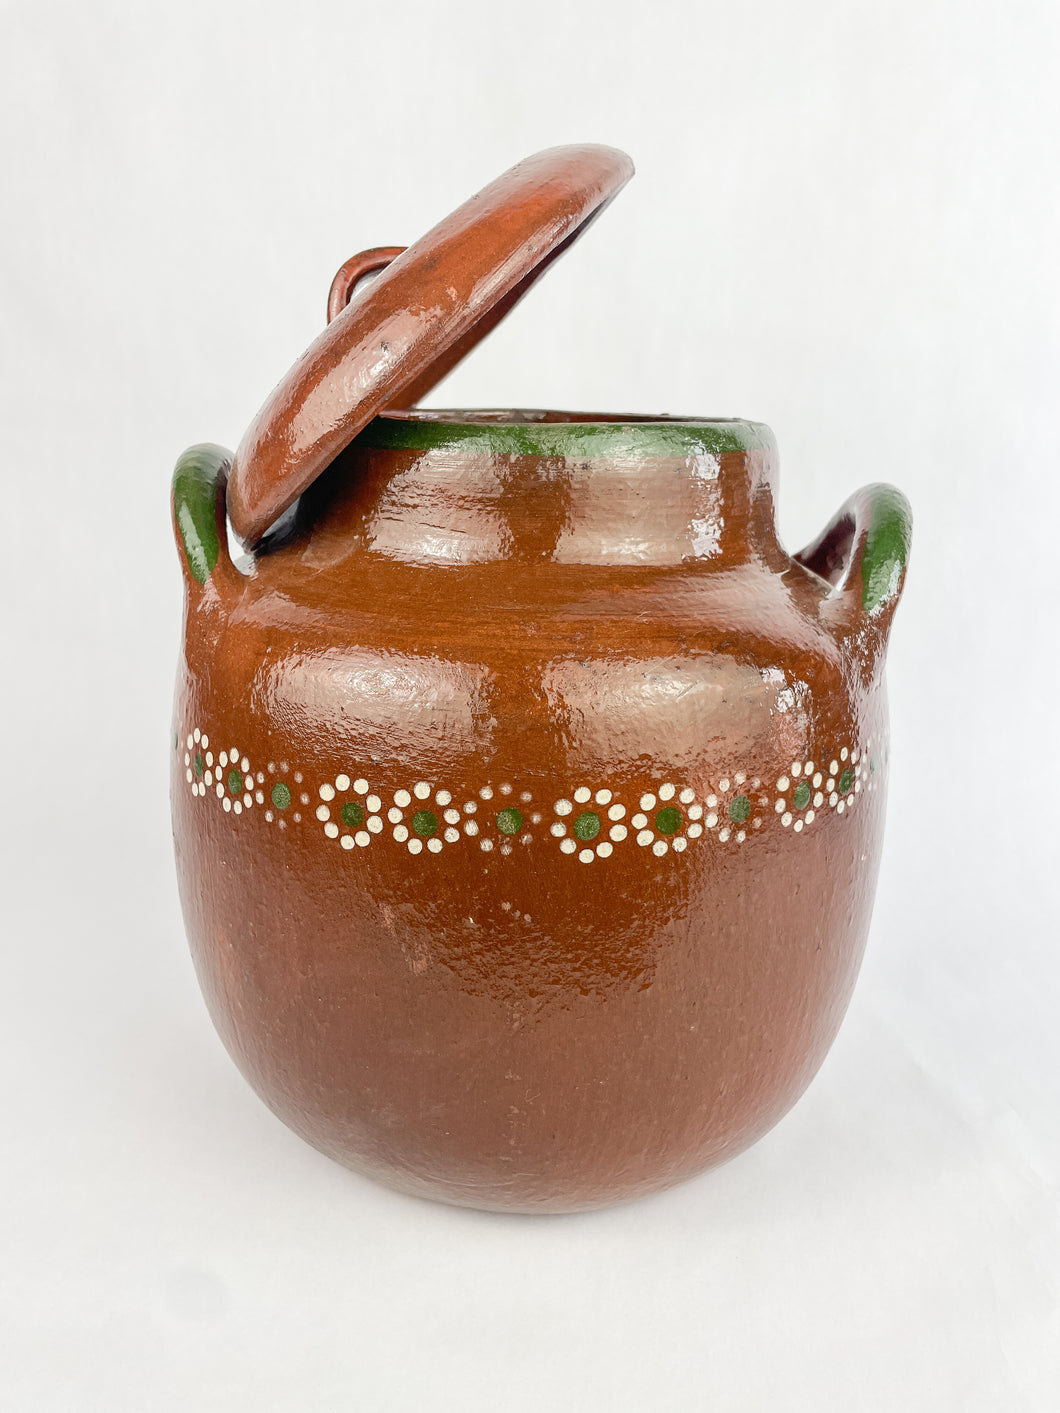 Michoacan Mexican Clay Pot Large 5 Liters Frijolera Mexican Clay Cooking Pot Small Olla Frijolera